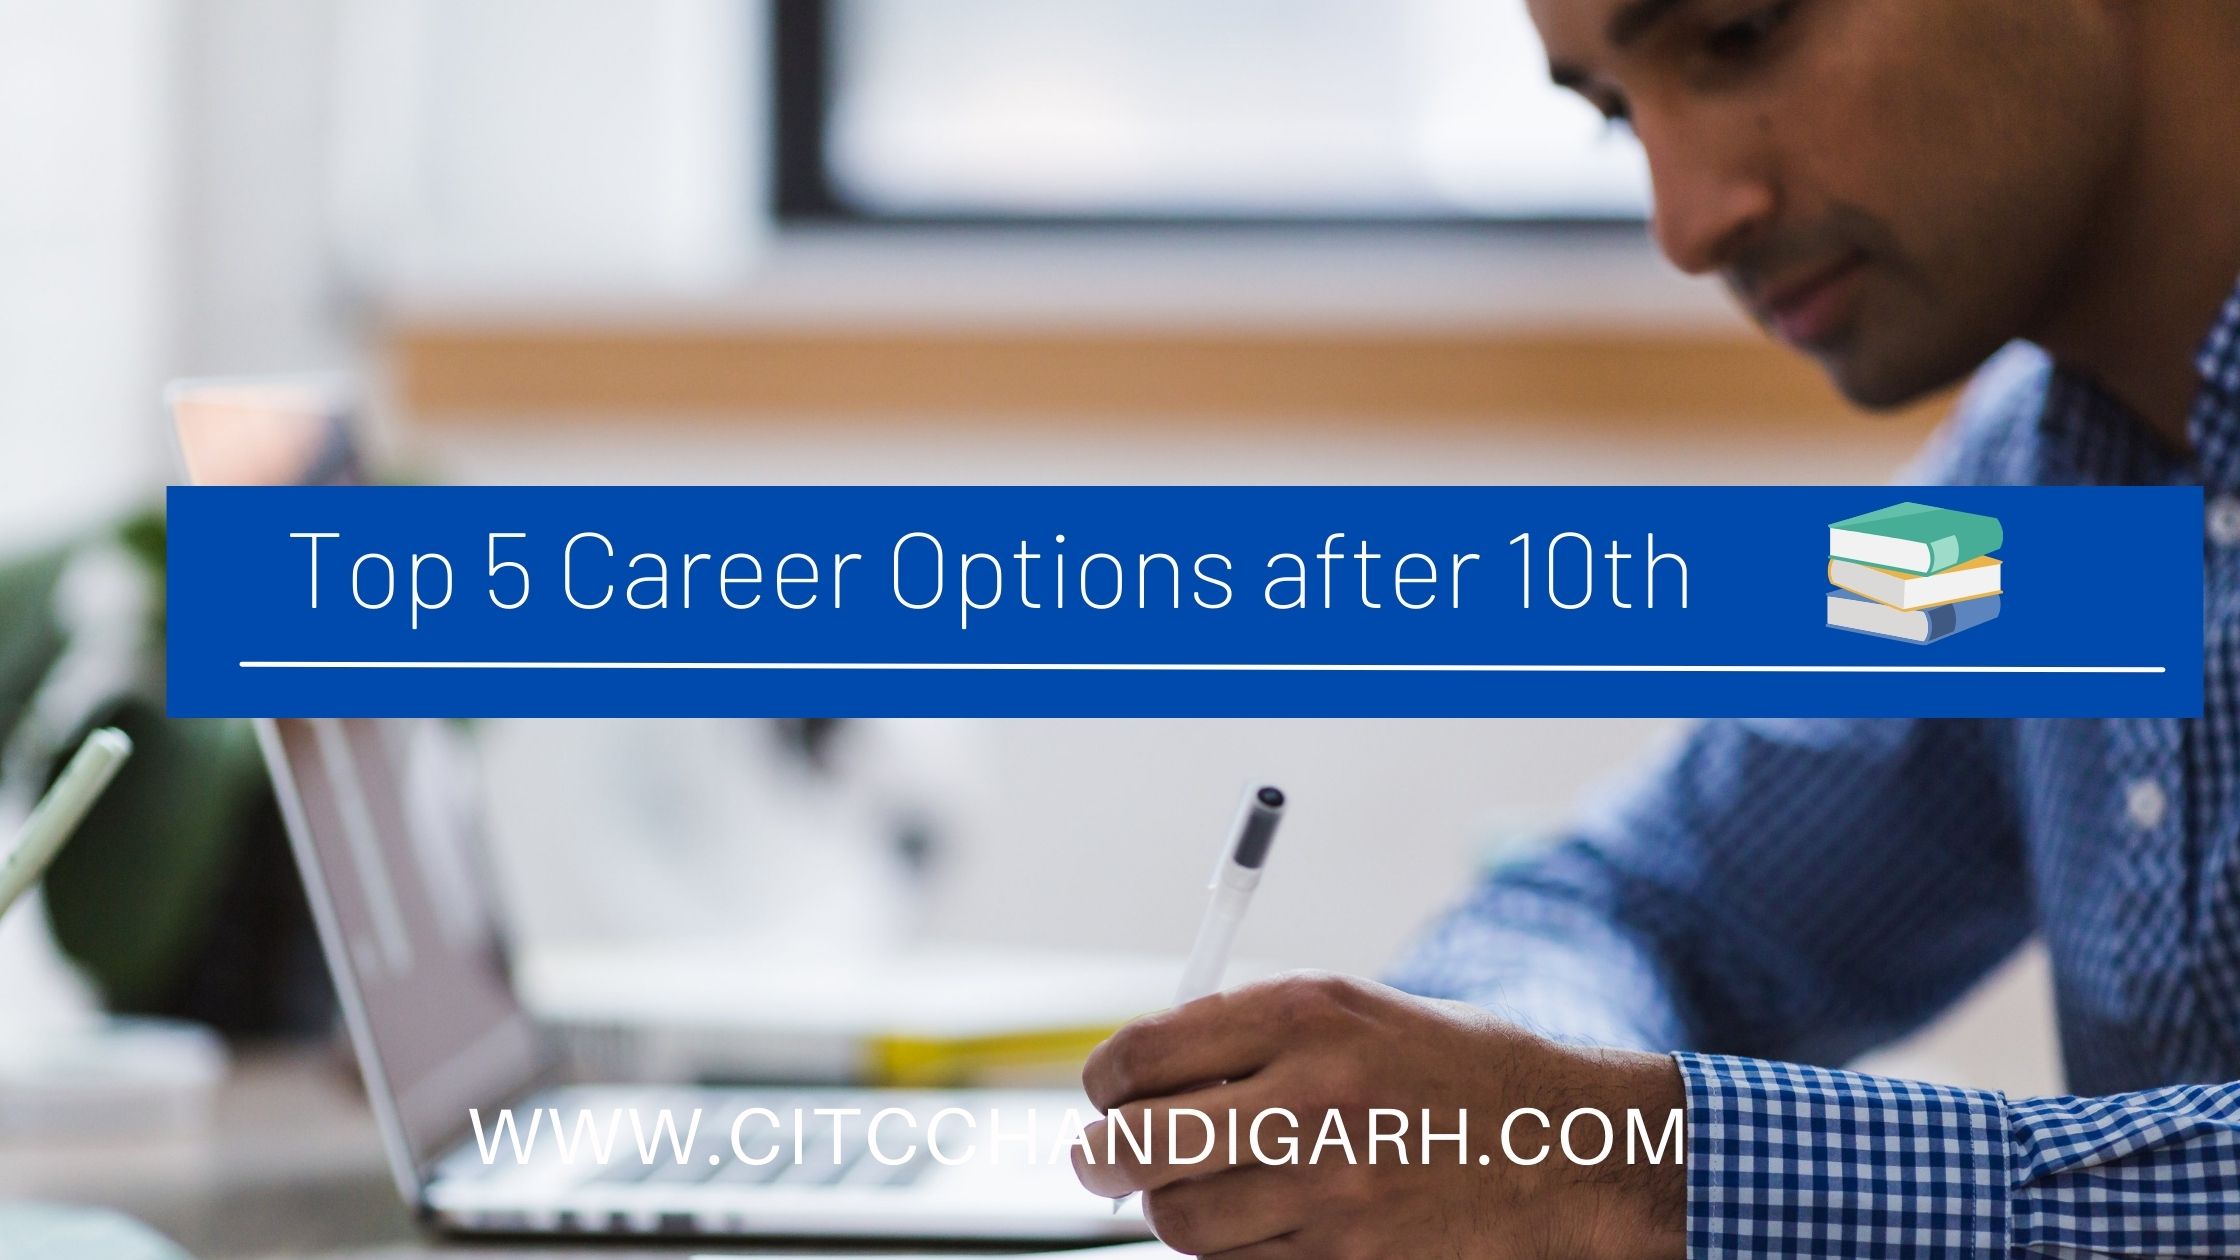 Top 5 Career Options after 10th